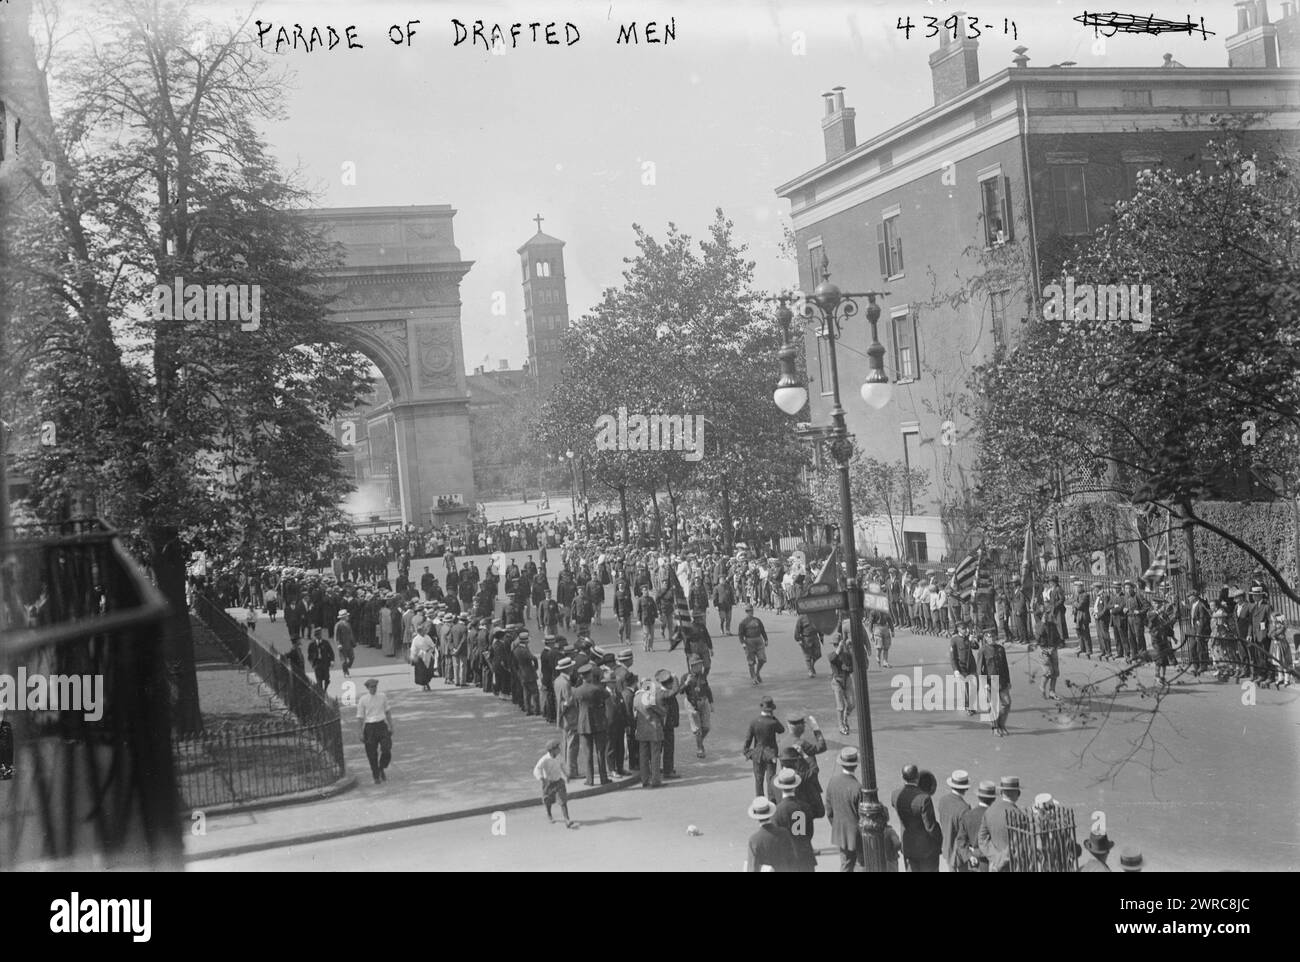 Parade of drafted men, Photograph shows drafted U.S. Army recruits marching on Fifth Avenue near the Washington Square Arch in New York City, September 4, 1917., 1917 Sept. 4, Glass negatives, 1 negative: glass Stock Photo